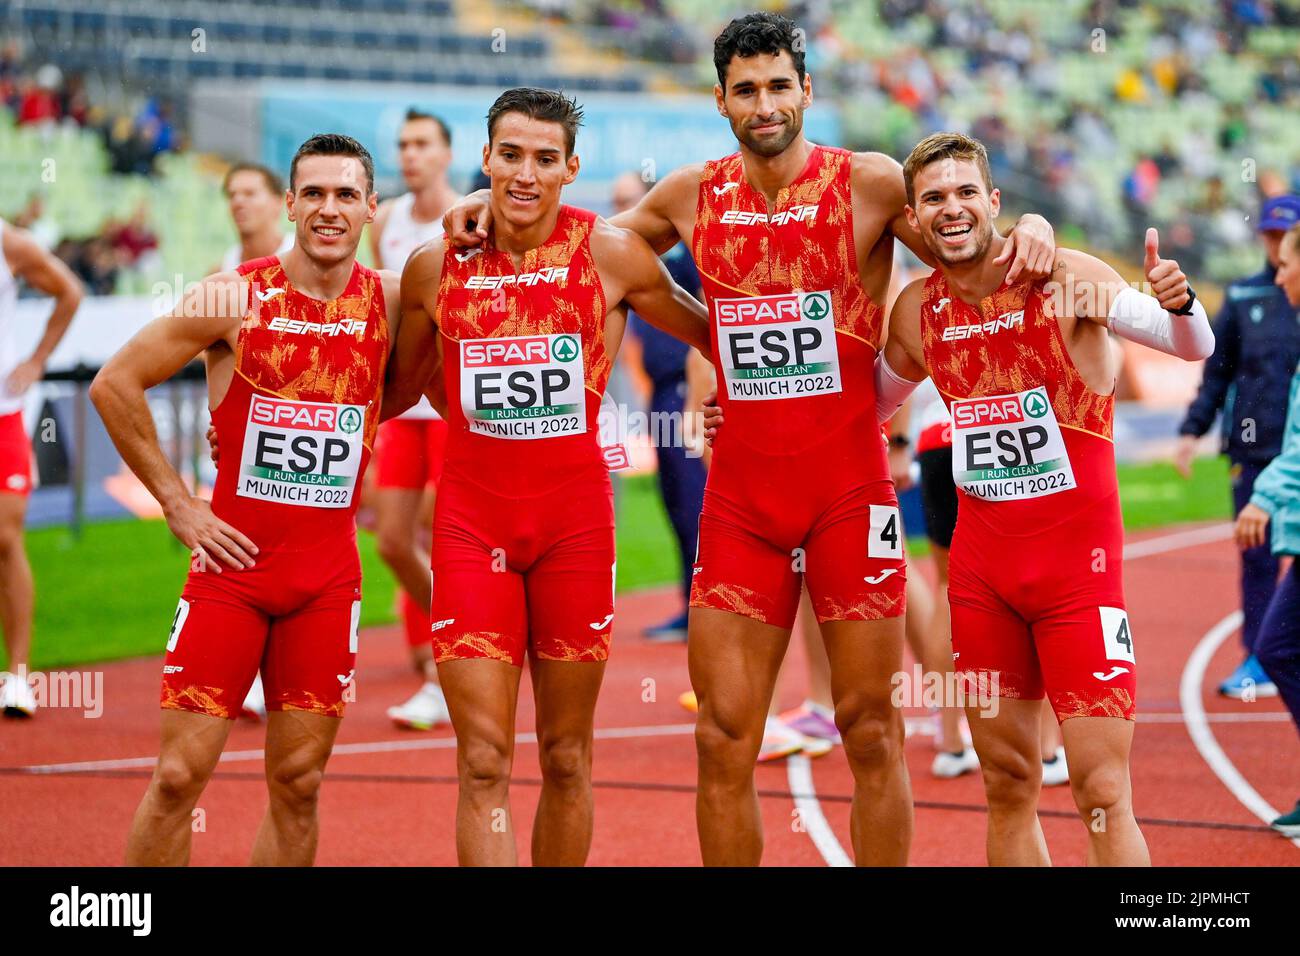 MUNCHEN, GERMANY - AUGUST 19: Samuel Garcia of Spain, Lucas Bua of Spain, Oscar Husillos of Spain and Manuel Guijarro of Spain competing in Men's 4x400m Relay at the European Championships Munich 2022 at the Olympiastadion on August 19, 2022 in Munchen, Germany (Photo by Andy Astfalck/BSR Agency) Stock Photo